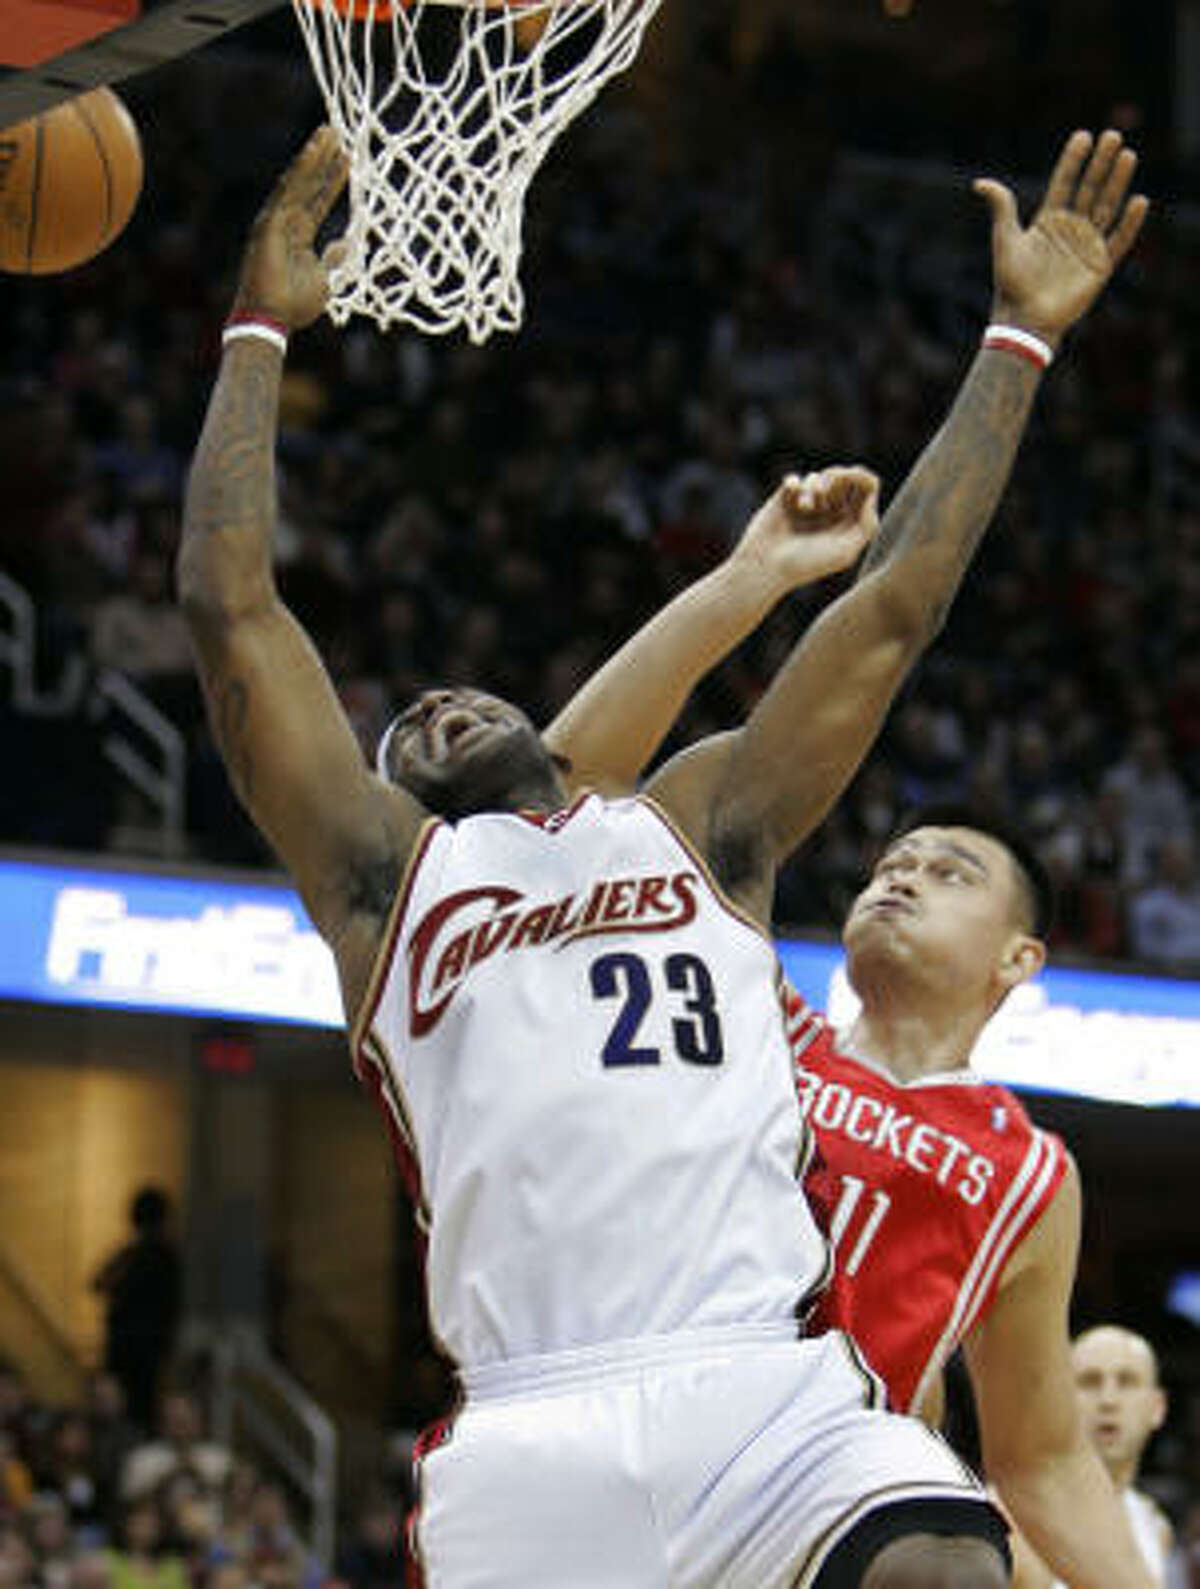 Cleveland Cavaliers forward LeBron James has the ball knocked away by Houston Rockets' Yao Ming during the first quarter.